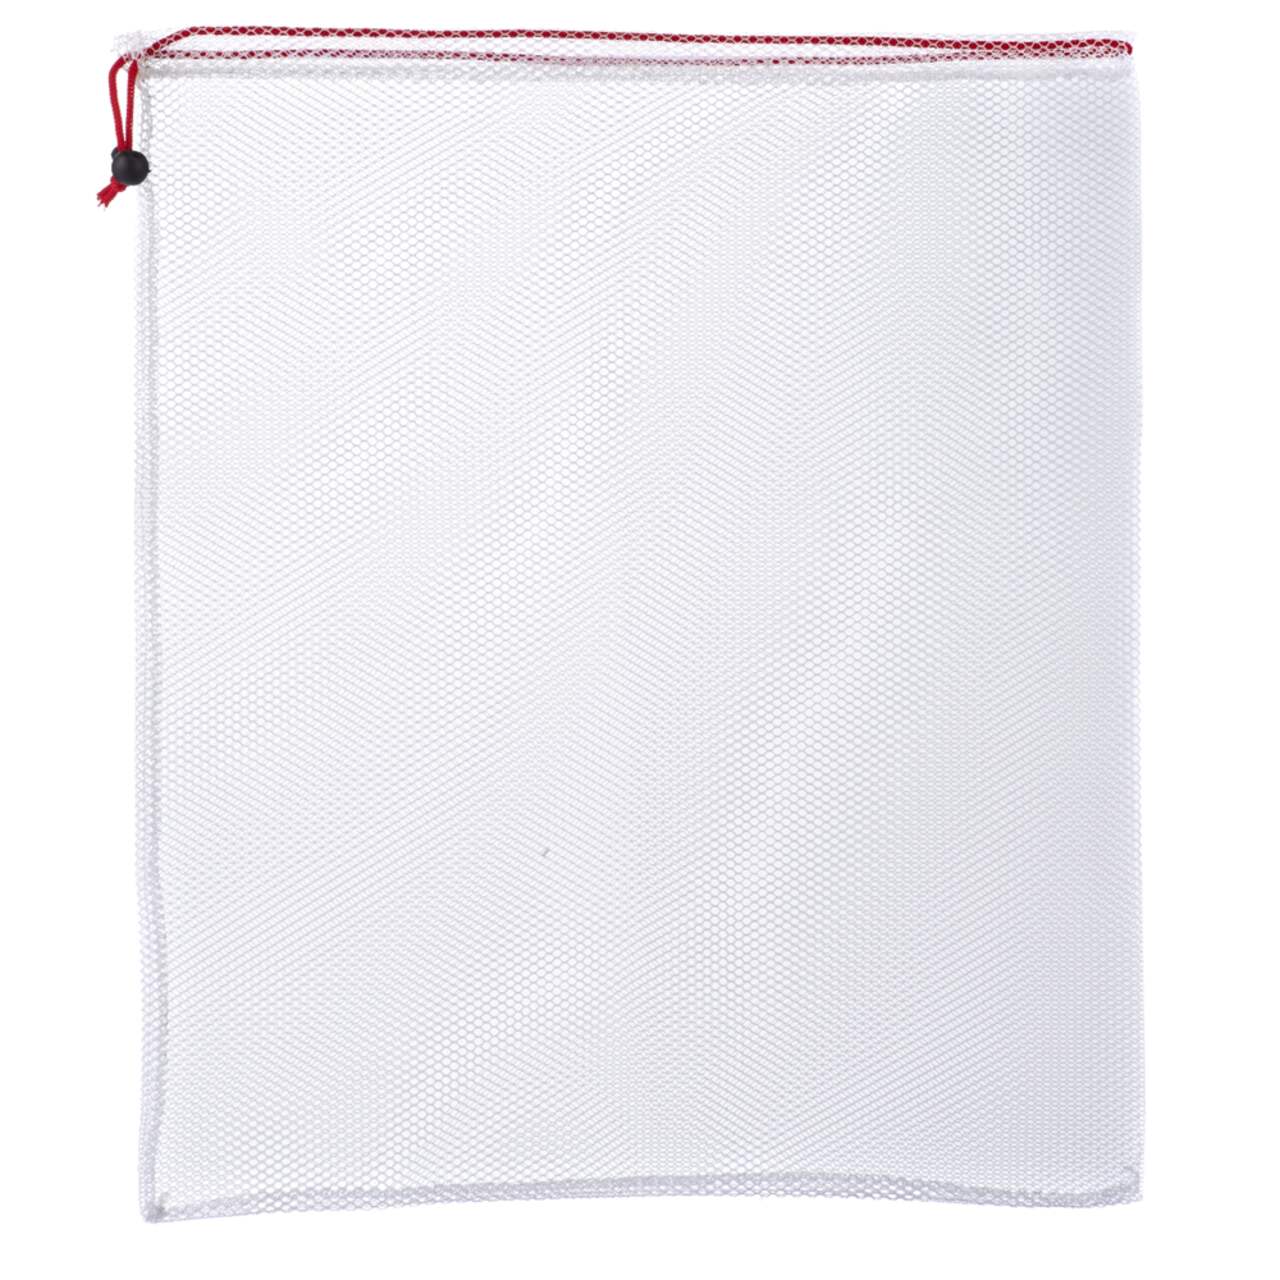 Outbound Multi-Purpose Mesh Drawstring Laundry/Wash Bag For Travel, Home,  Camping & Sport